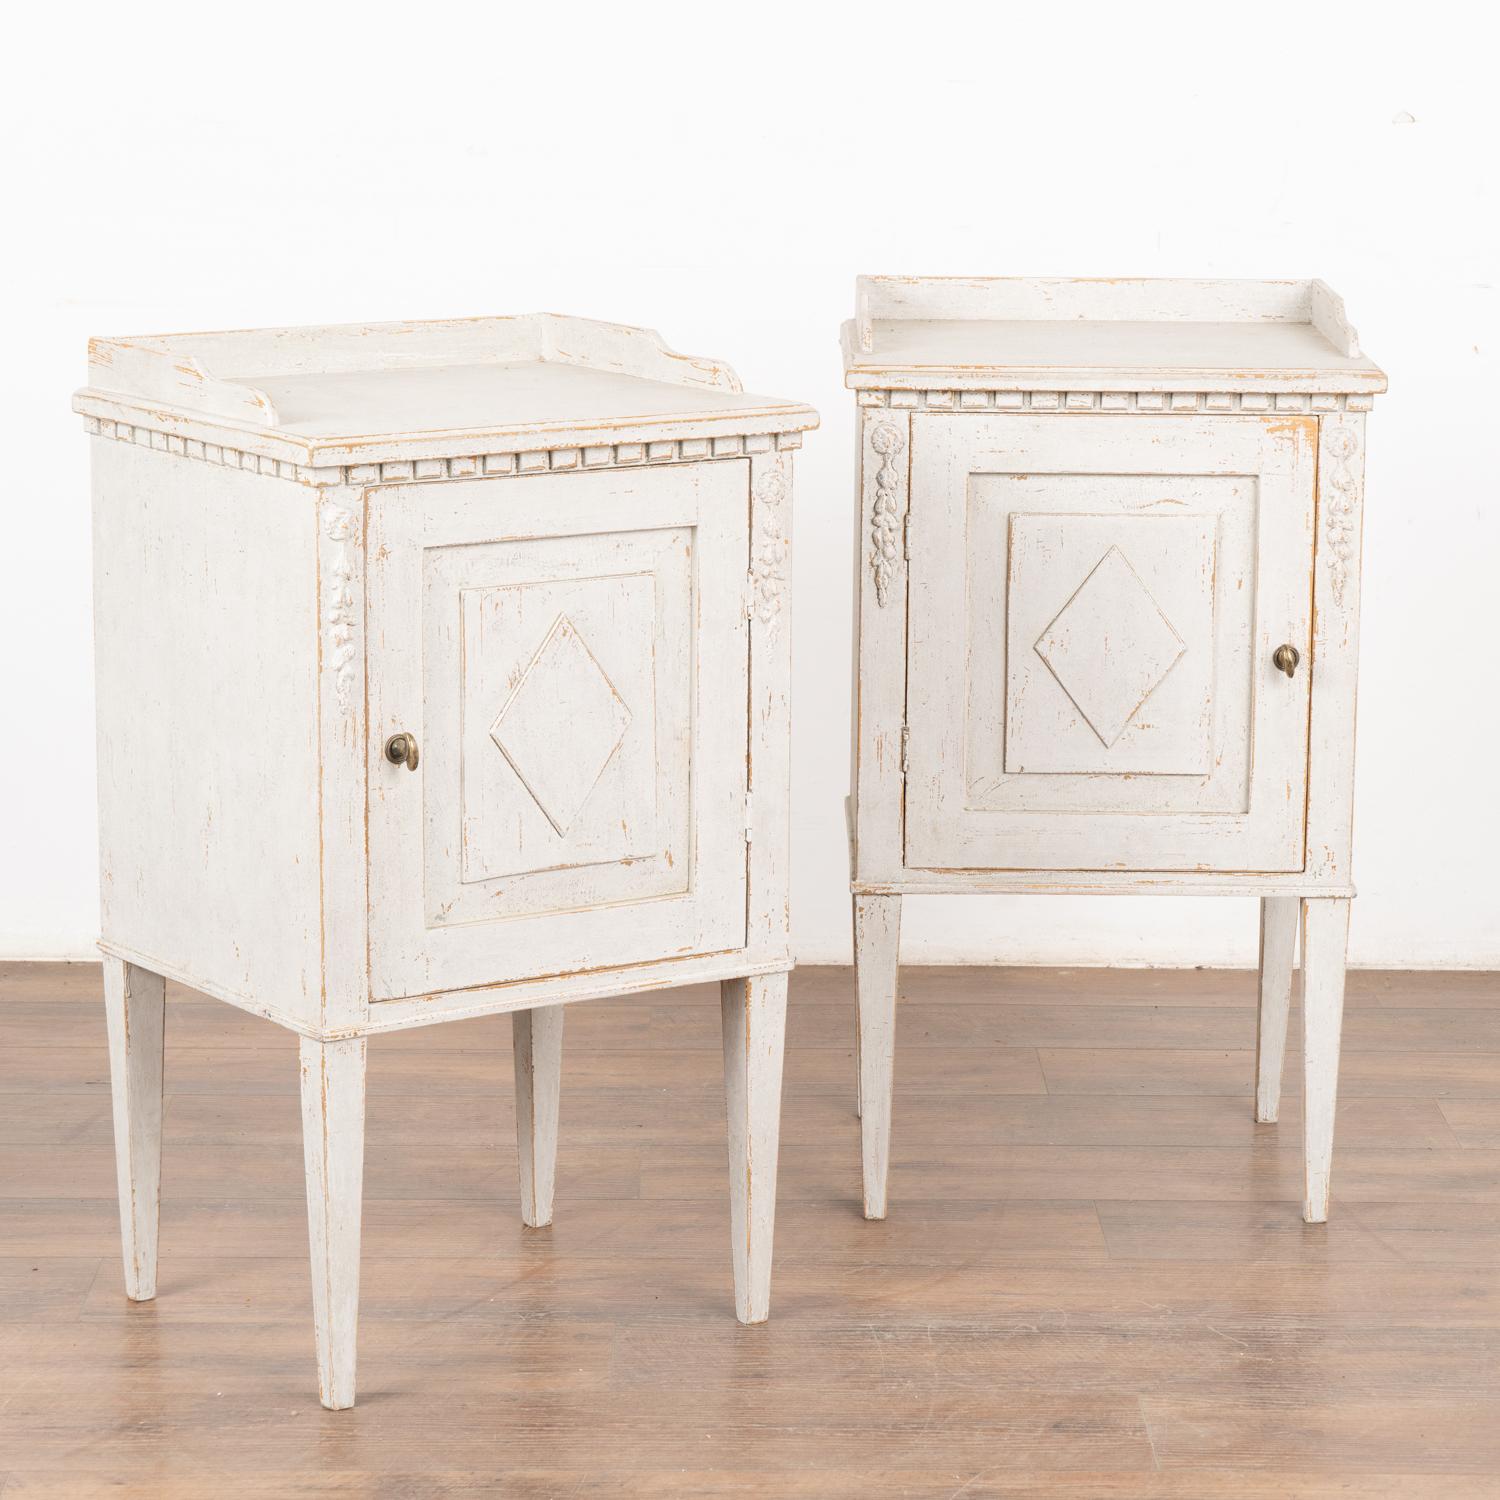 Pair, small Swedish country Gustavian white painted nightstands or side tables standing on tapered legs.
Applied floral carving accents the front along with dentil molding and diamond on panel door which opens with turning brass knob.
Professionally